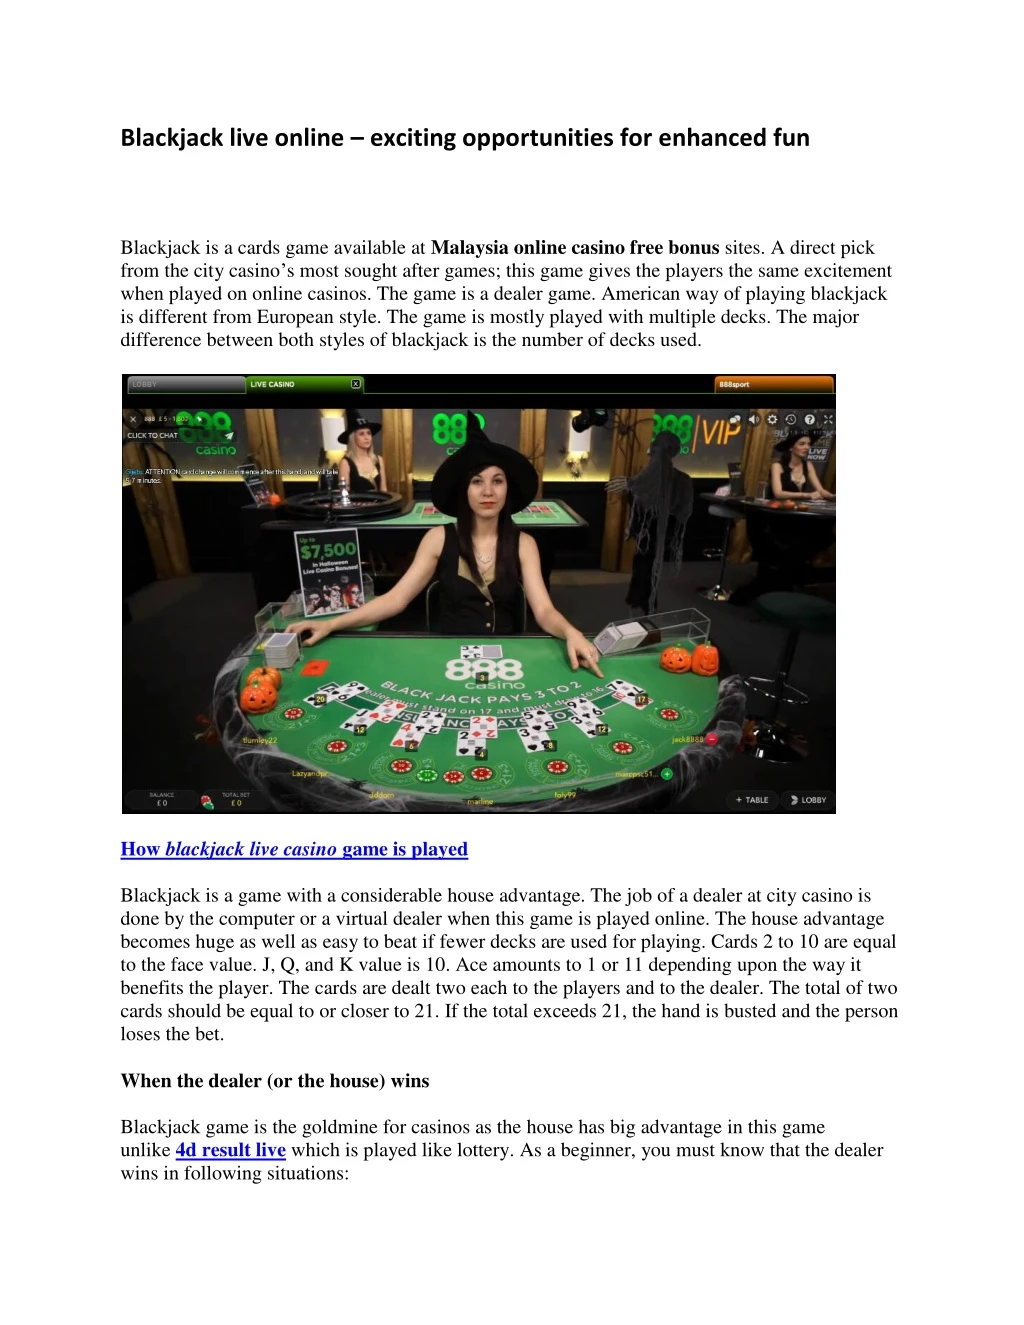 blackjack live online exciting opportunities